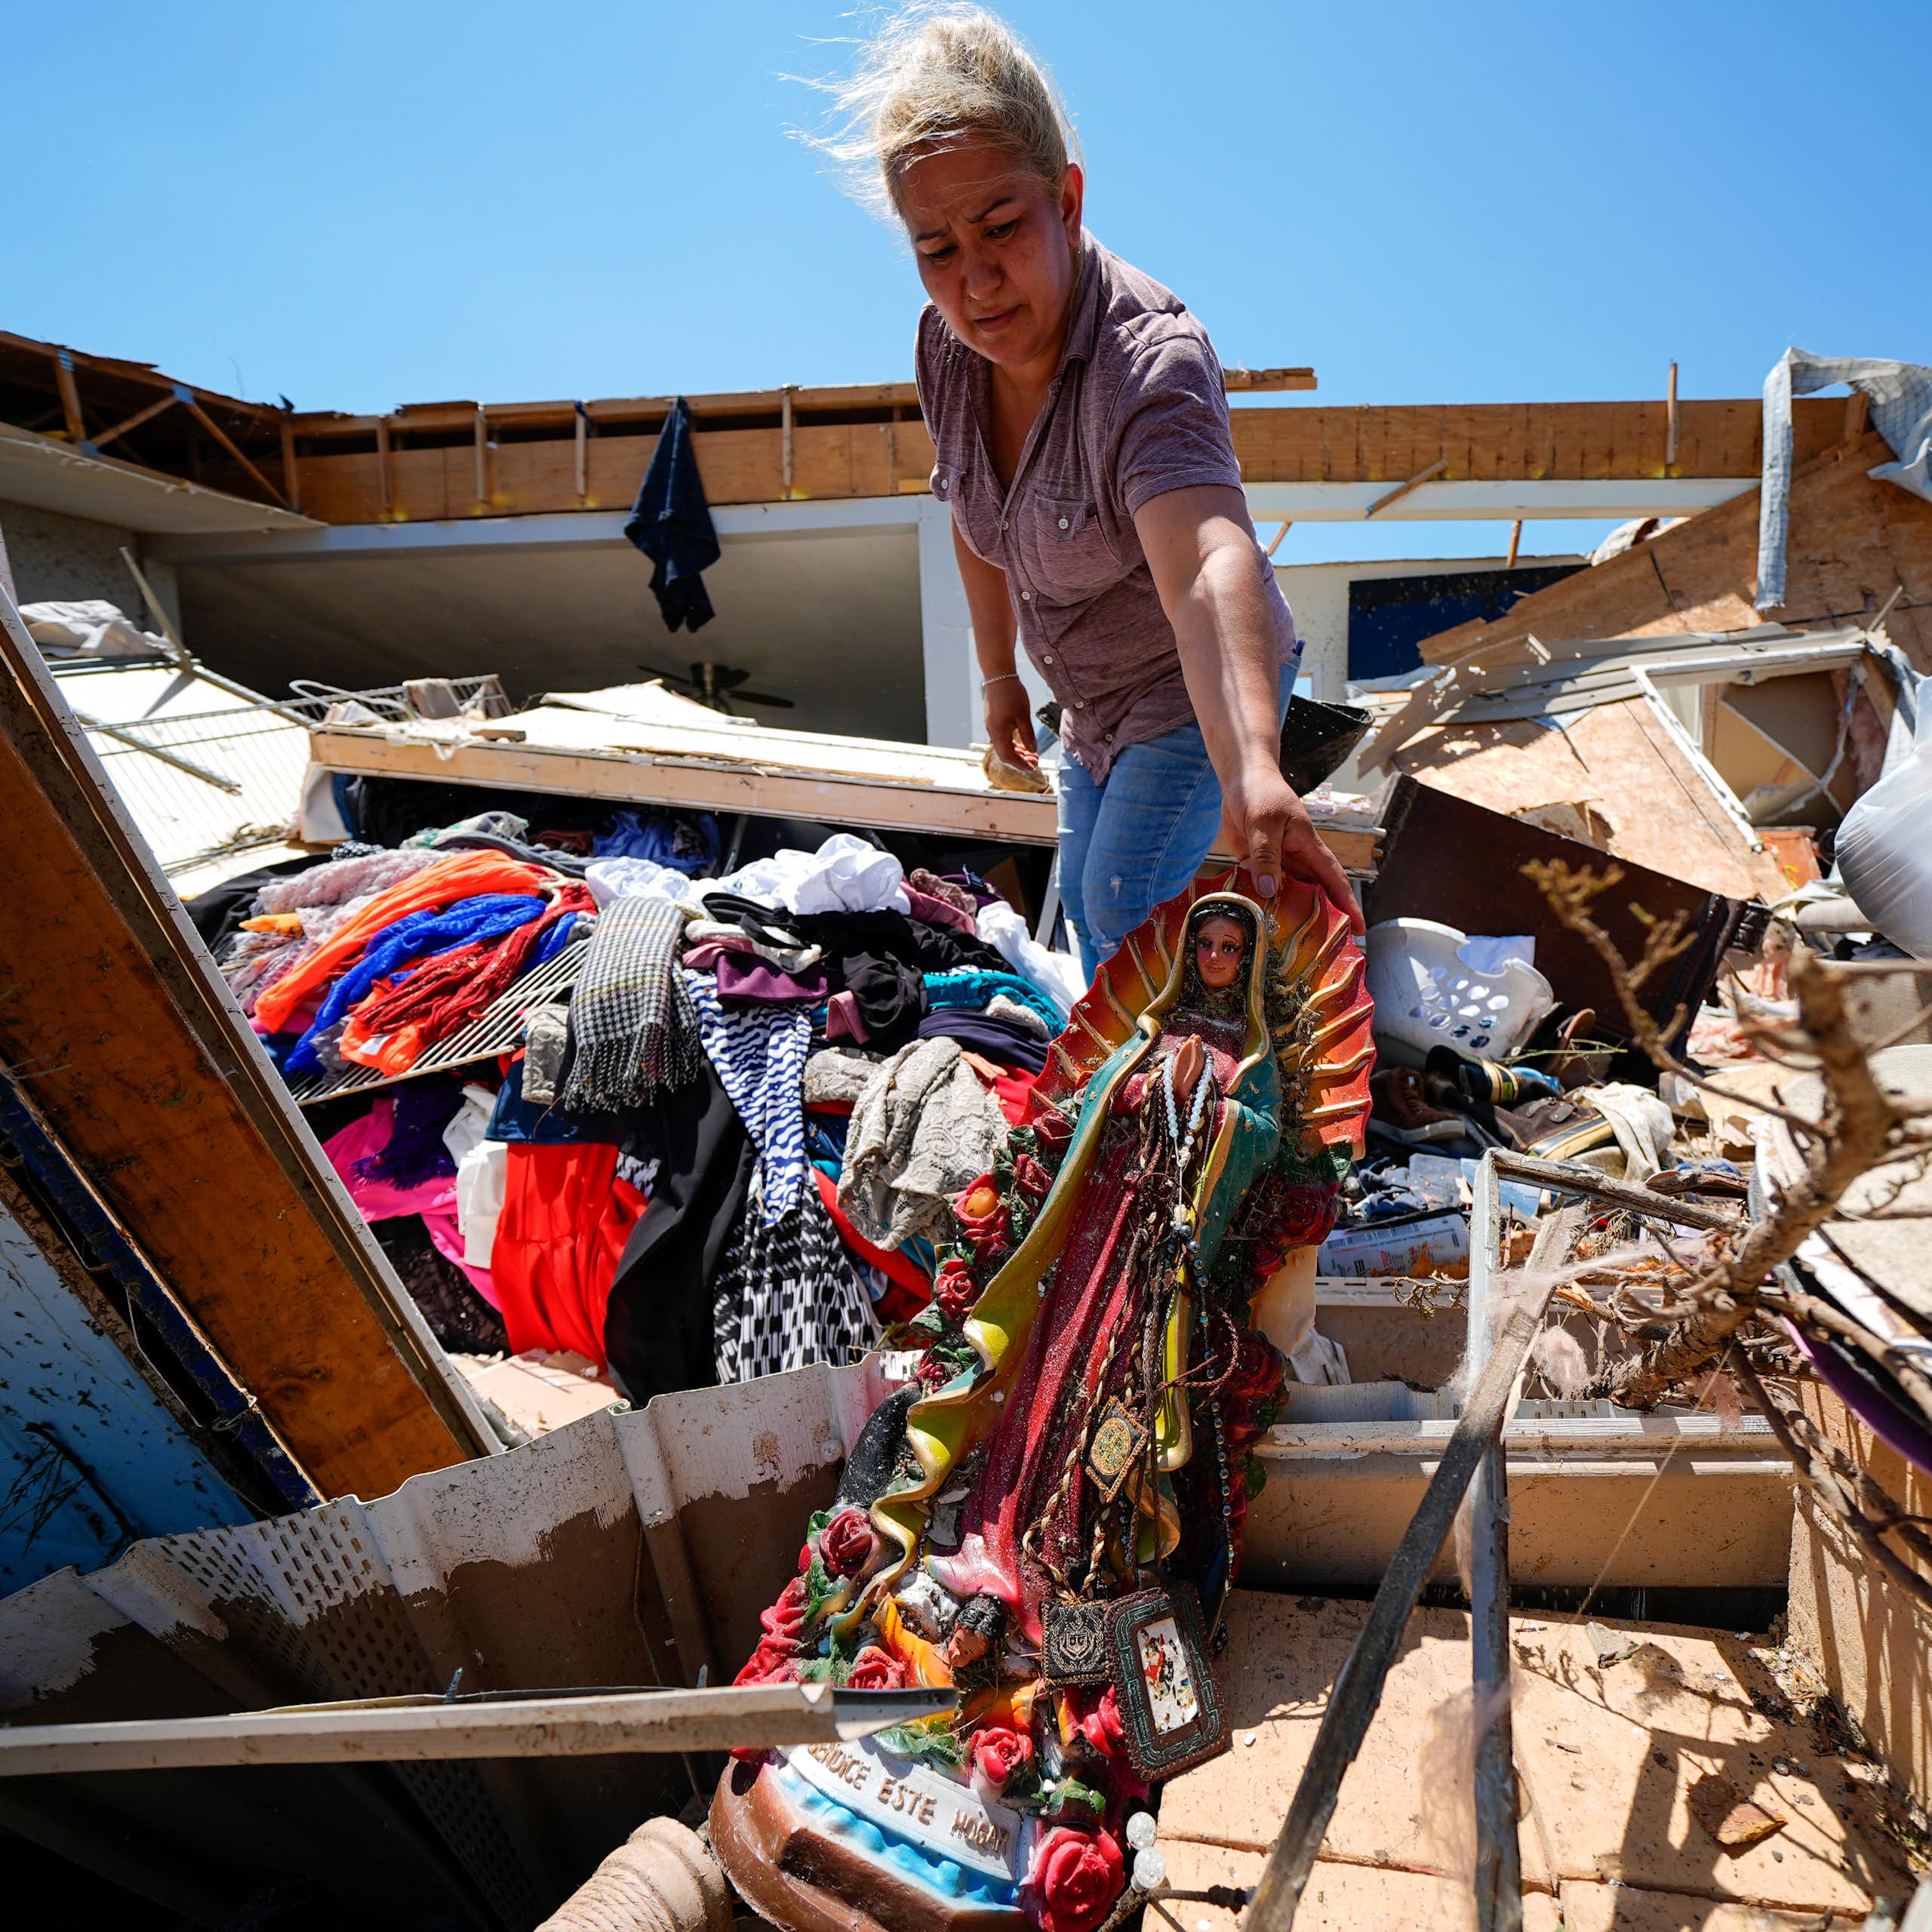 A woman pulls a religious statue out from among debris. A splintered home and scattered clothing are around her.